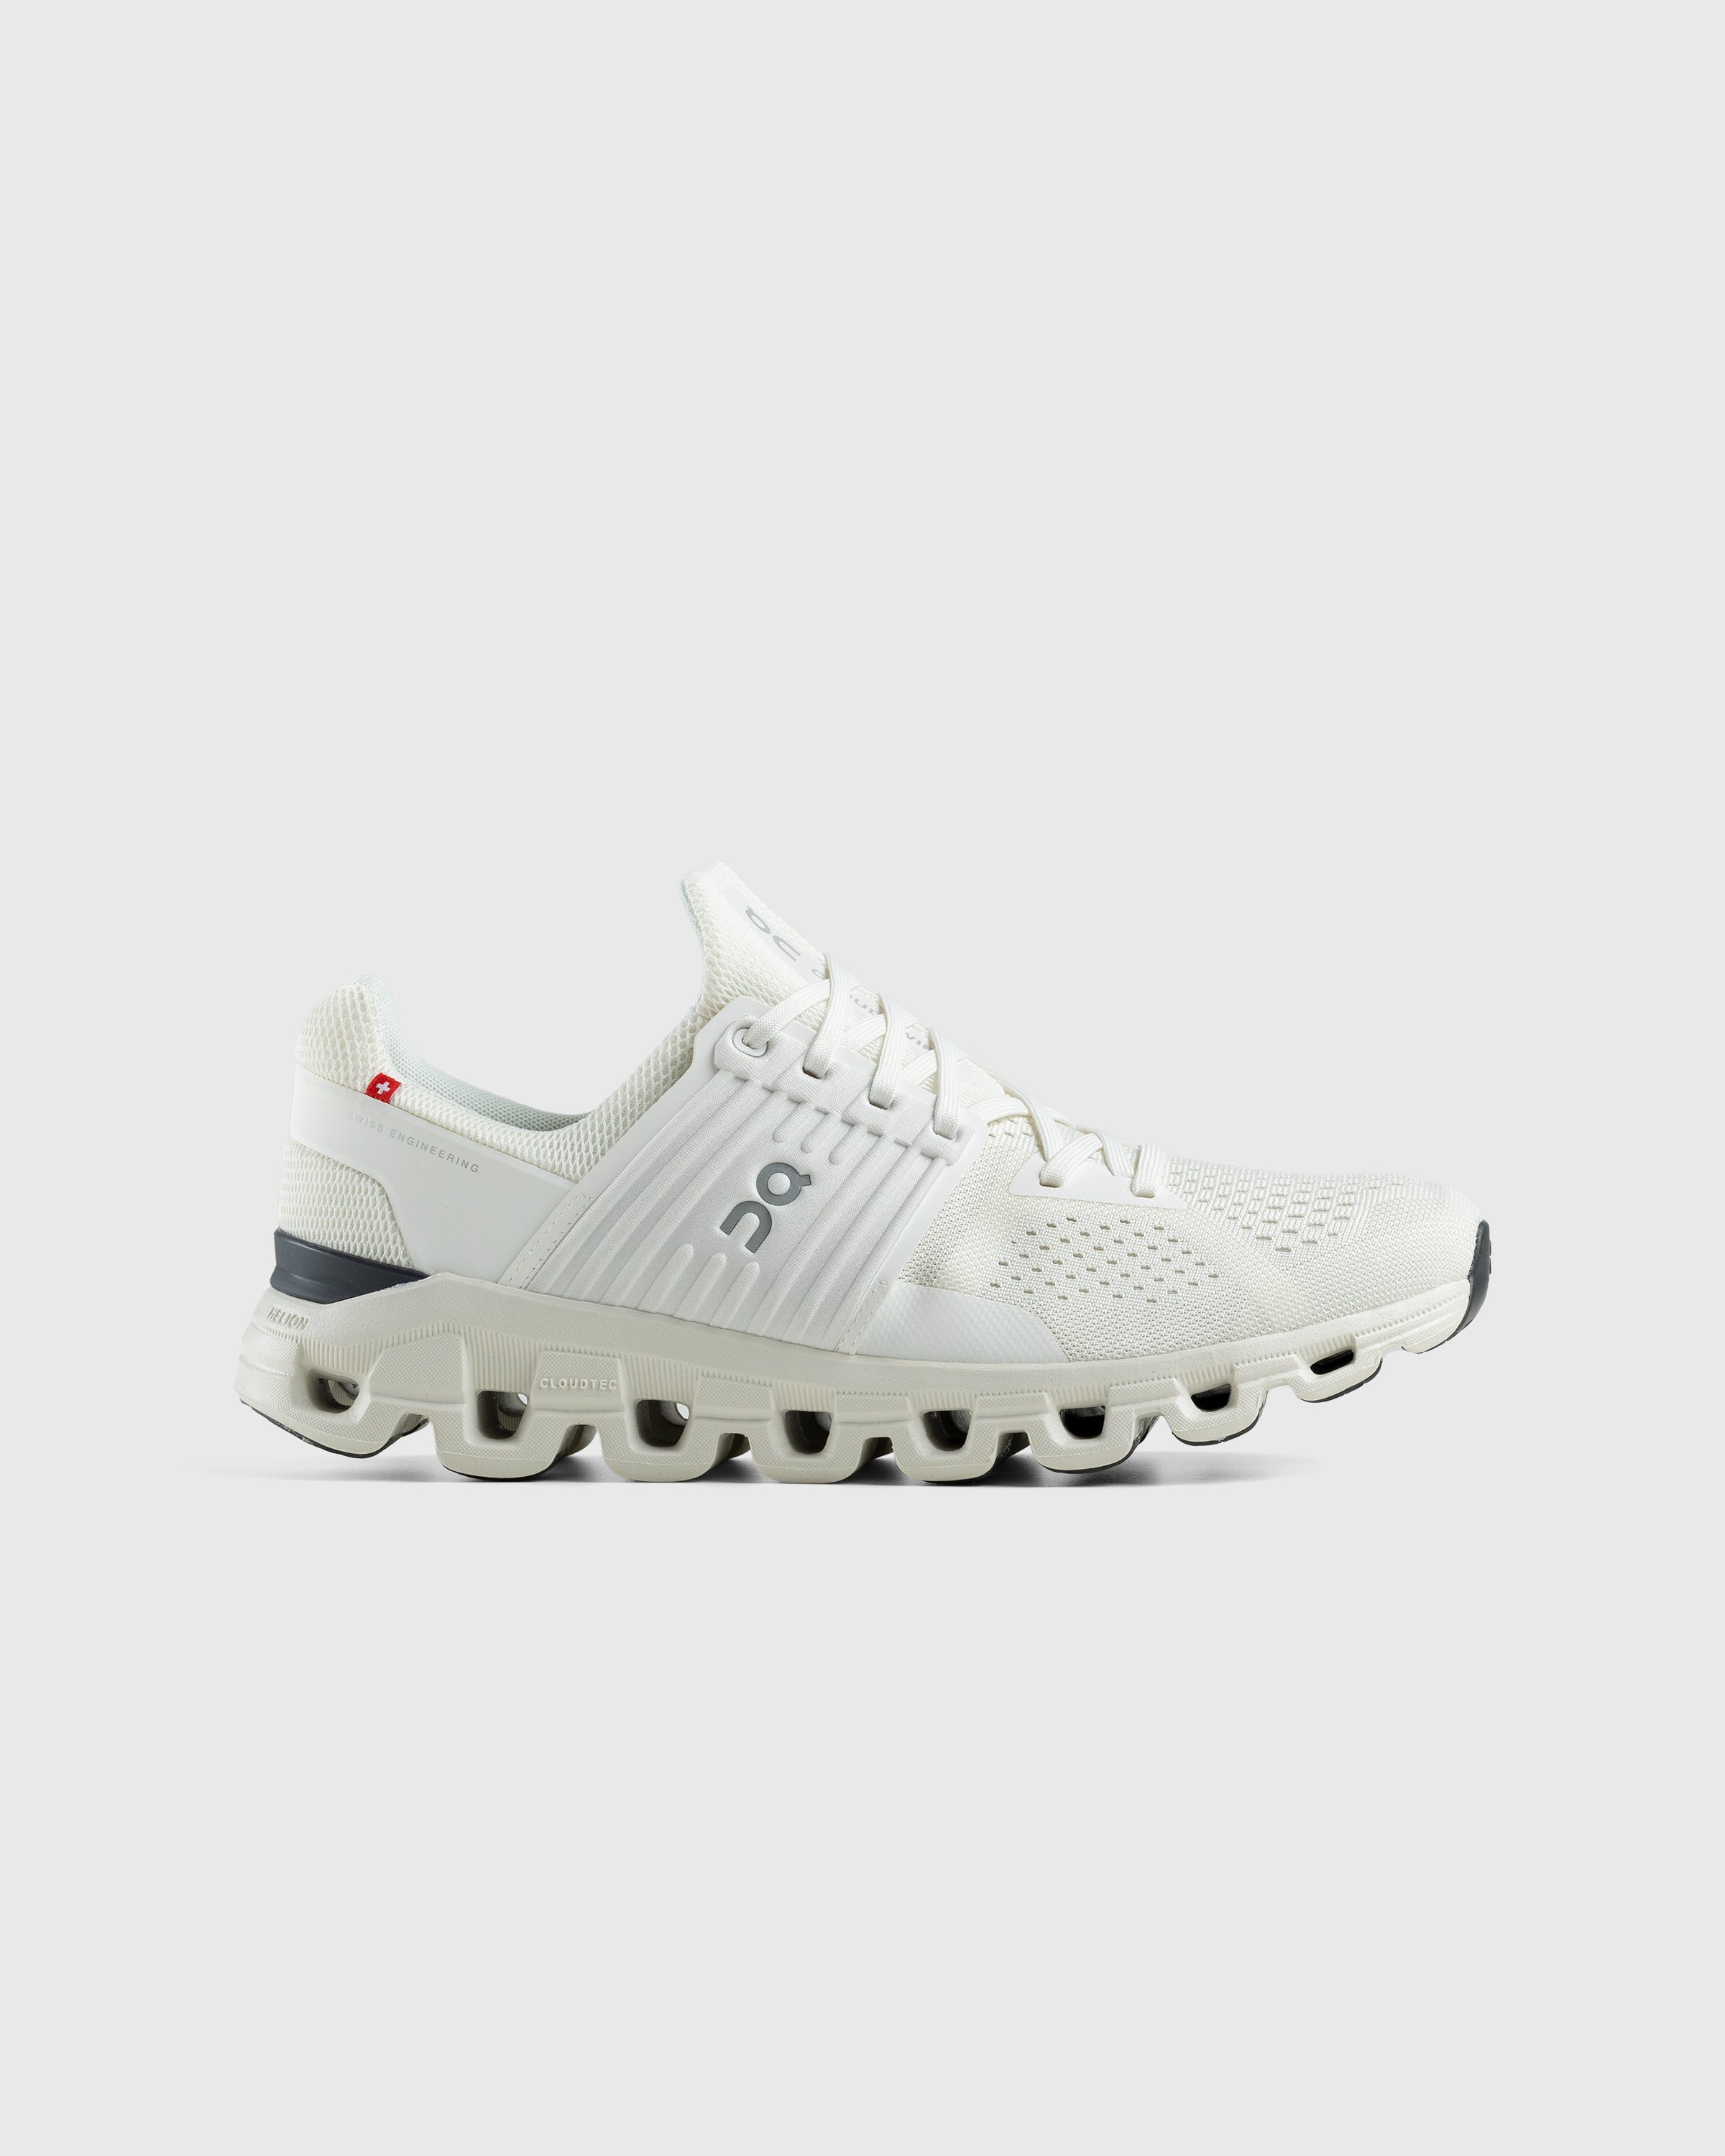 On - Cloudswift All White - Footwear - White - Image 1